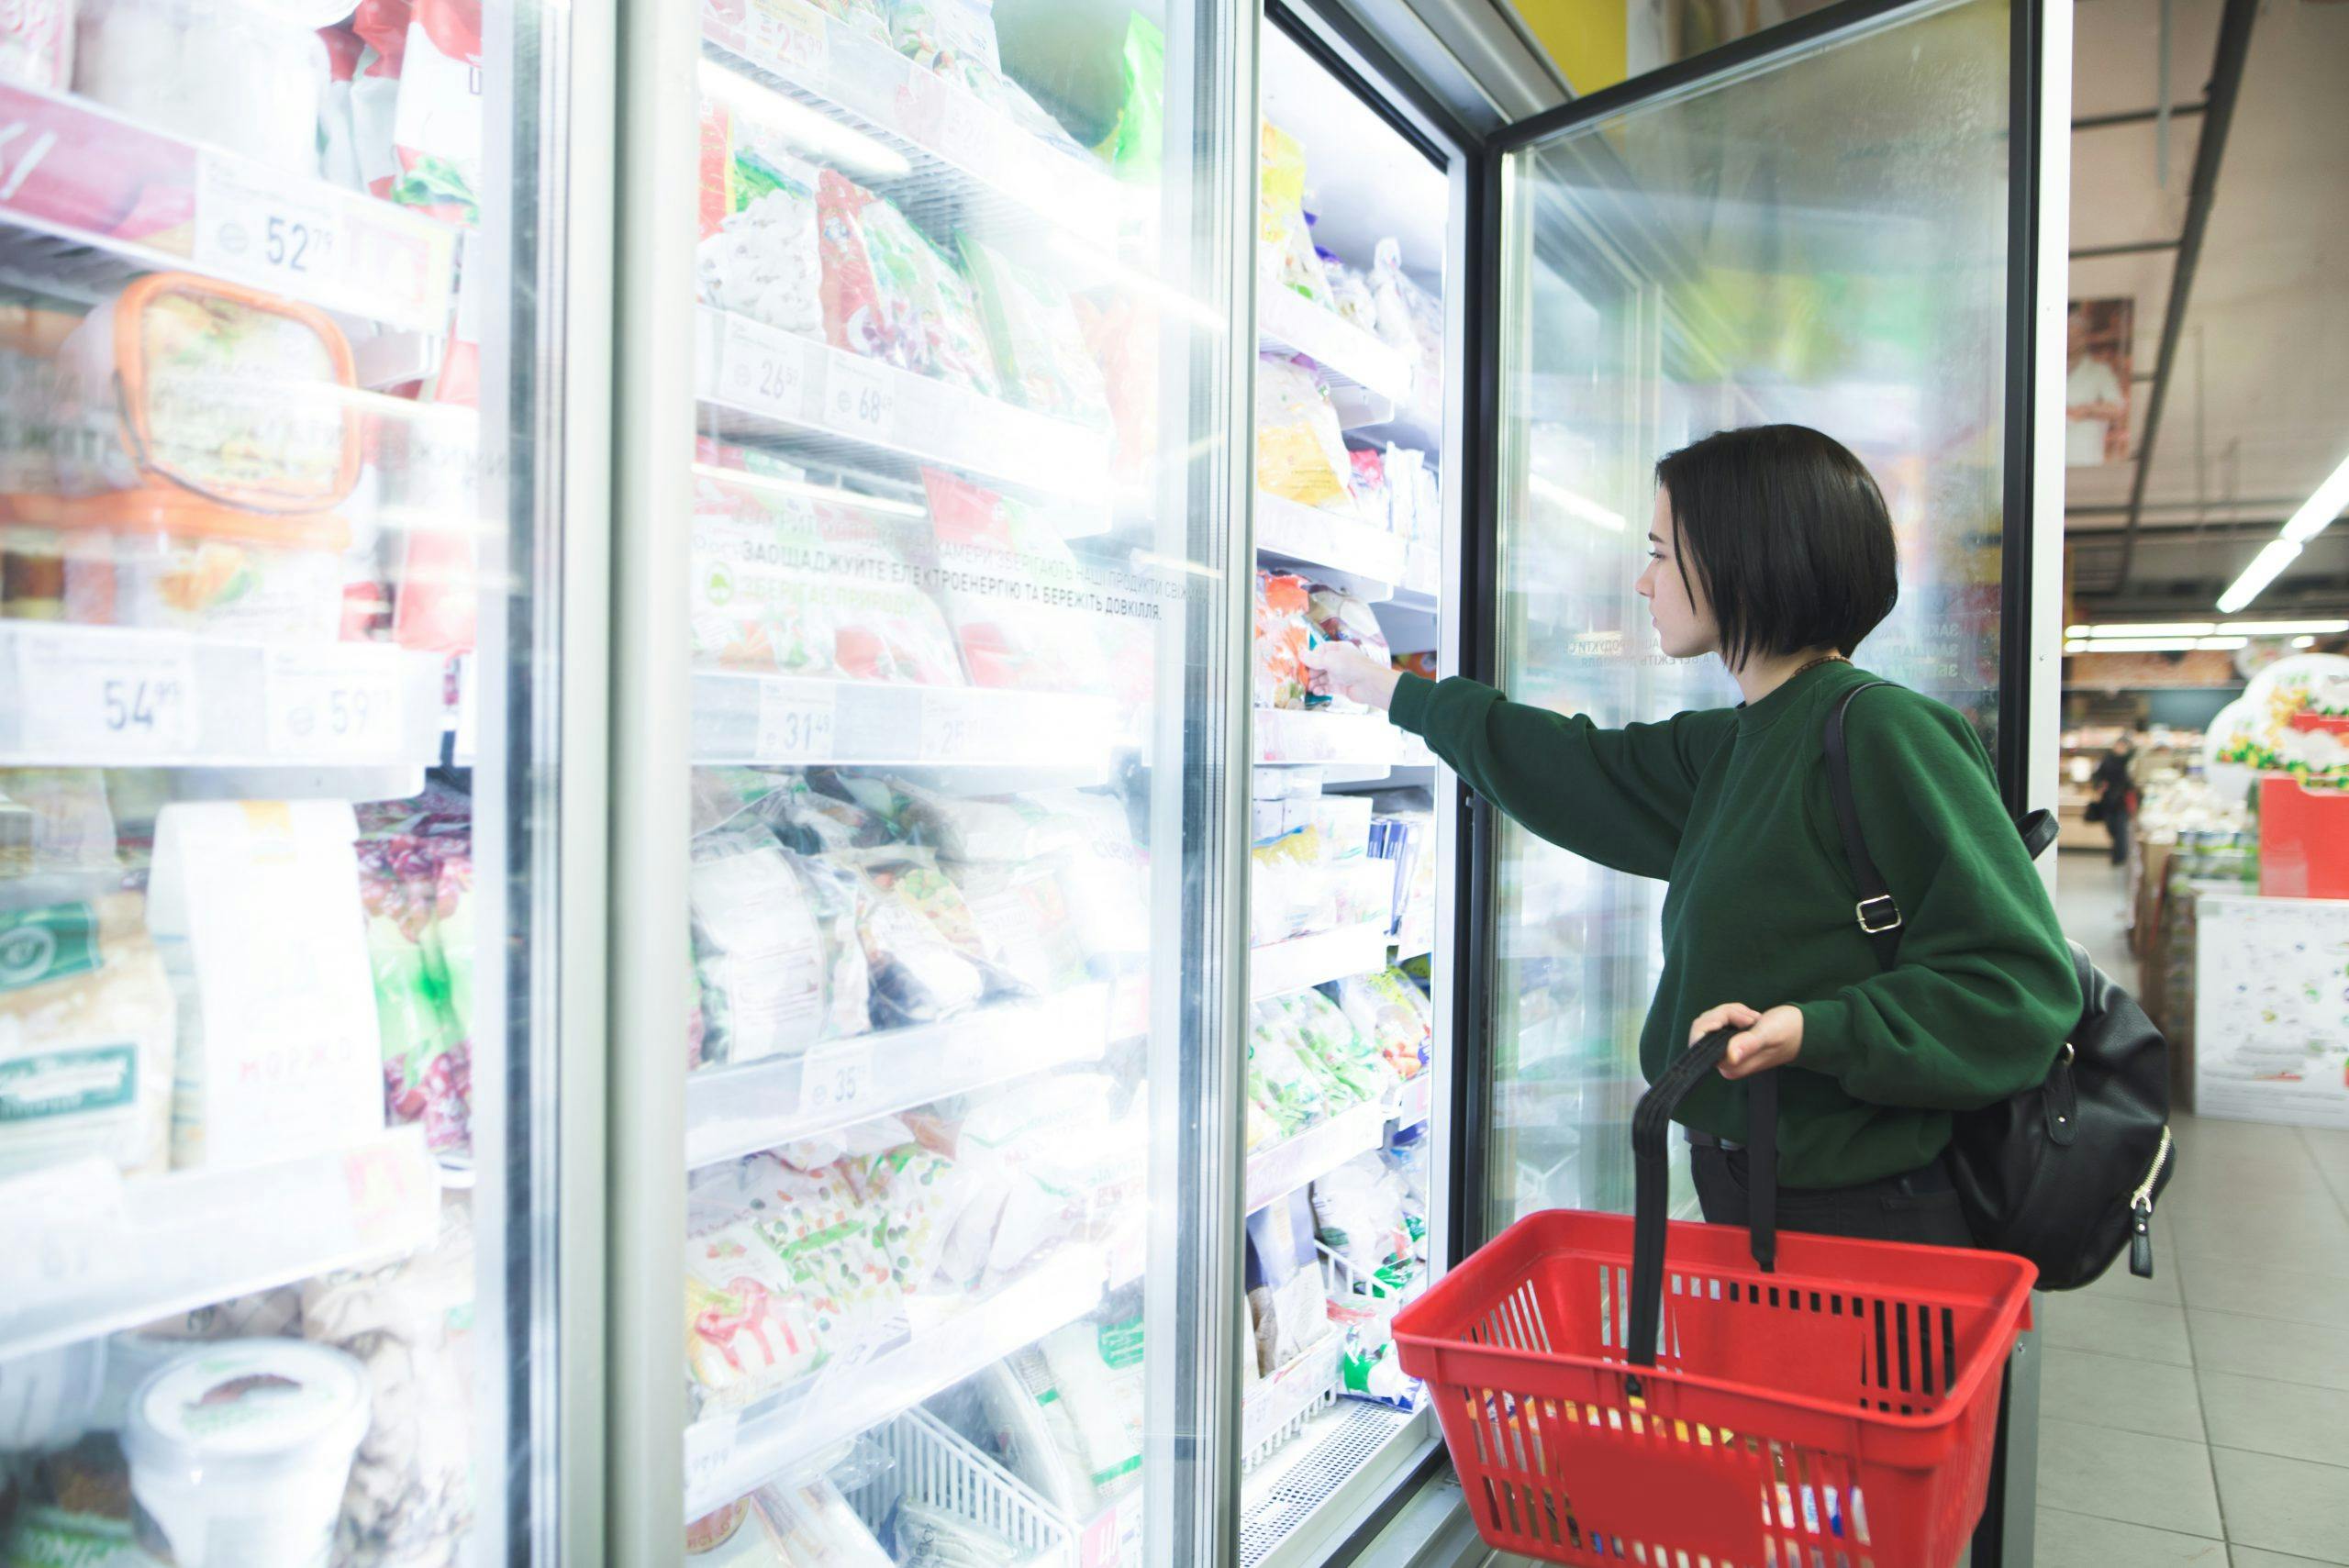 3 Frozen Food Safety Programs That Will Keep Your Brand Safe - The RangeMe  Blog